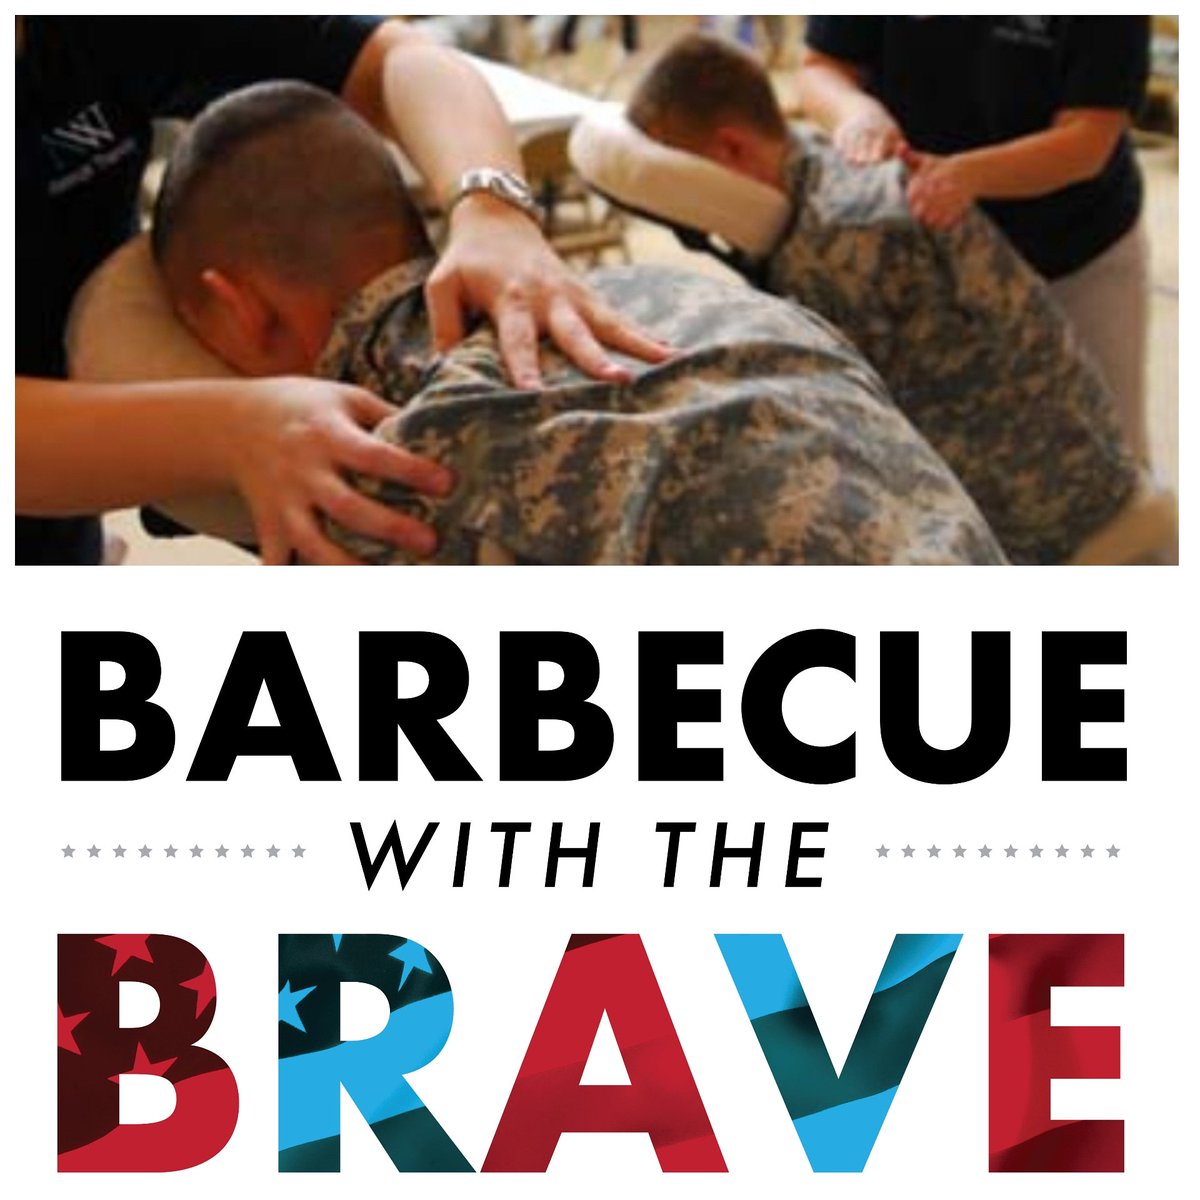 We want to treat our vets & military members to some relief. July 13th!
FREE onsite massages by Licensed Massage Therapist, Jessica Brown. (Insured by AMTA - American Massage Therapy Association) 
All are welcome! Register TODAY at secure.actblue.com/donate/veteran… pic.x.com/chqi5hoaxm